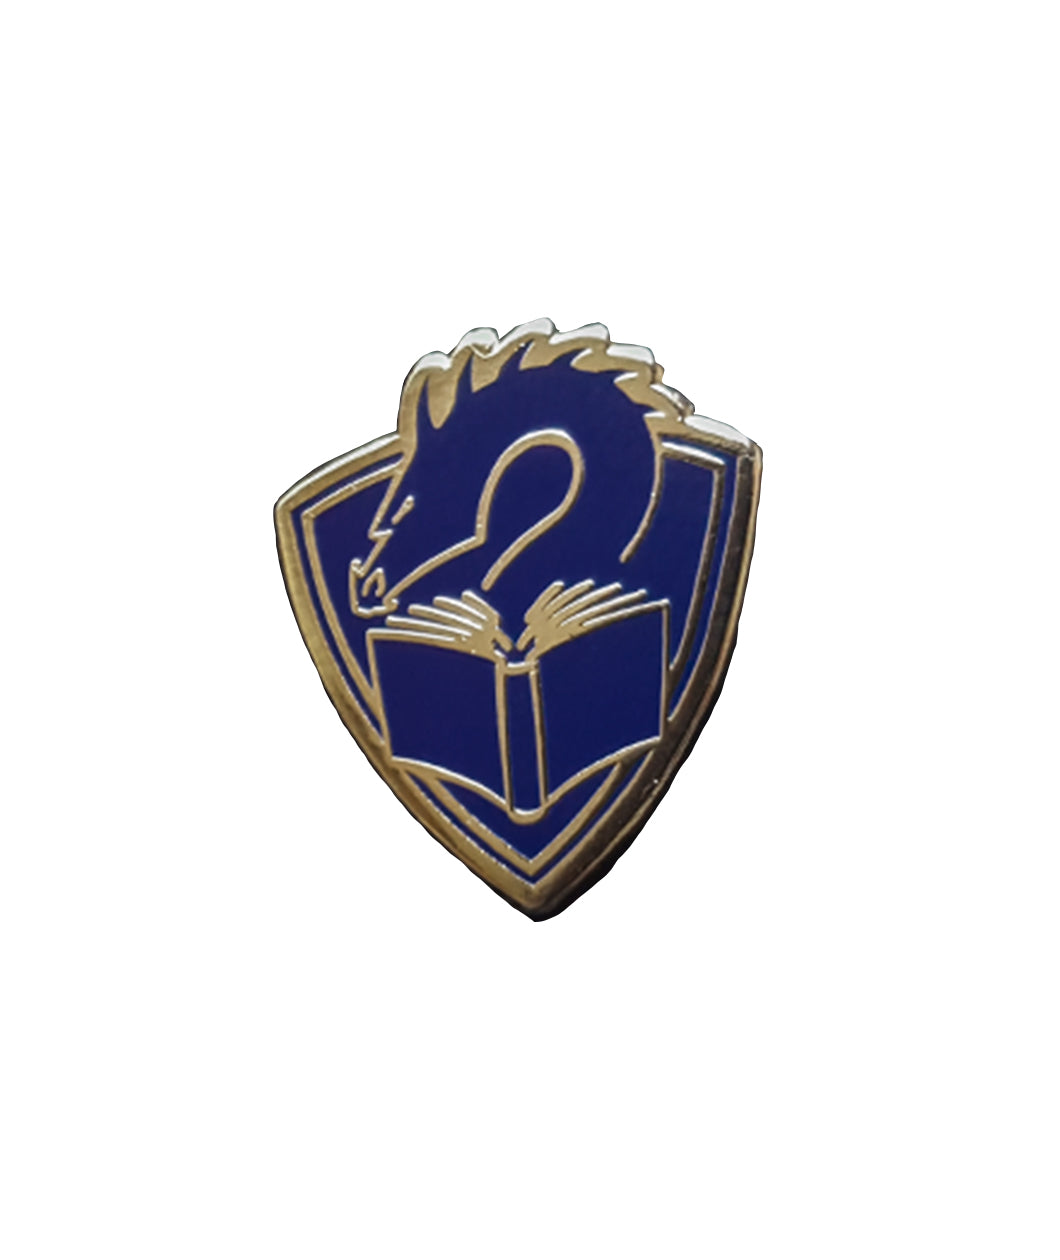 An enamel pin of a dragon's head peering at the pages of an open book, with a crest shape behind them. The crest, dragon, and book are blue, and they are all outlined in gold.